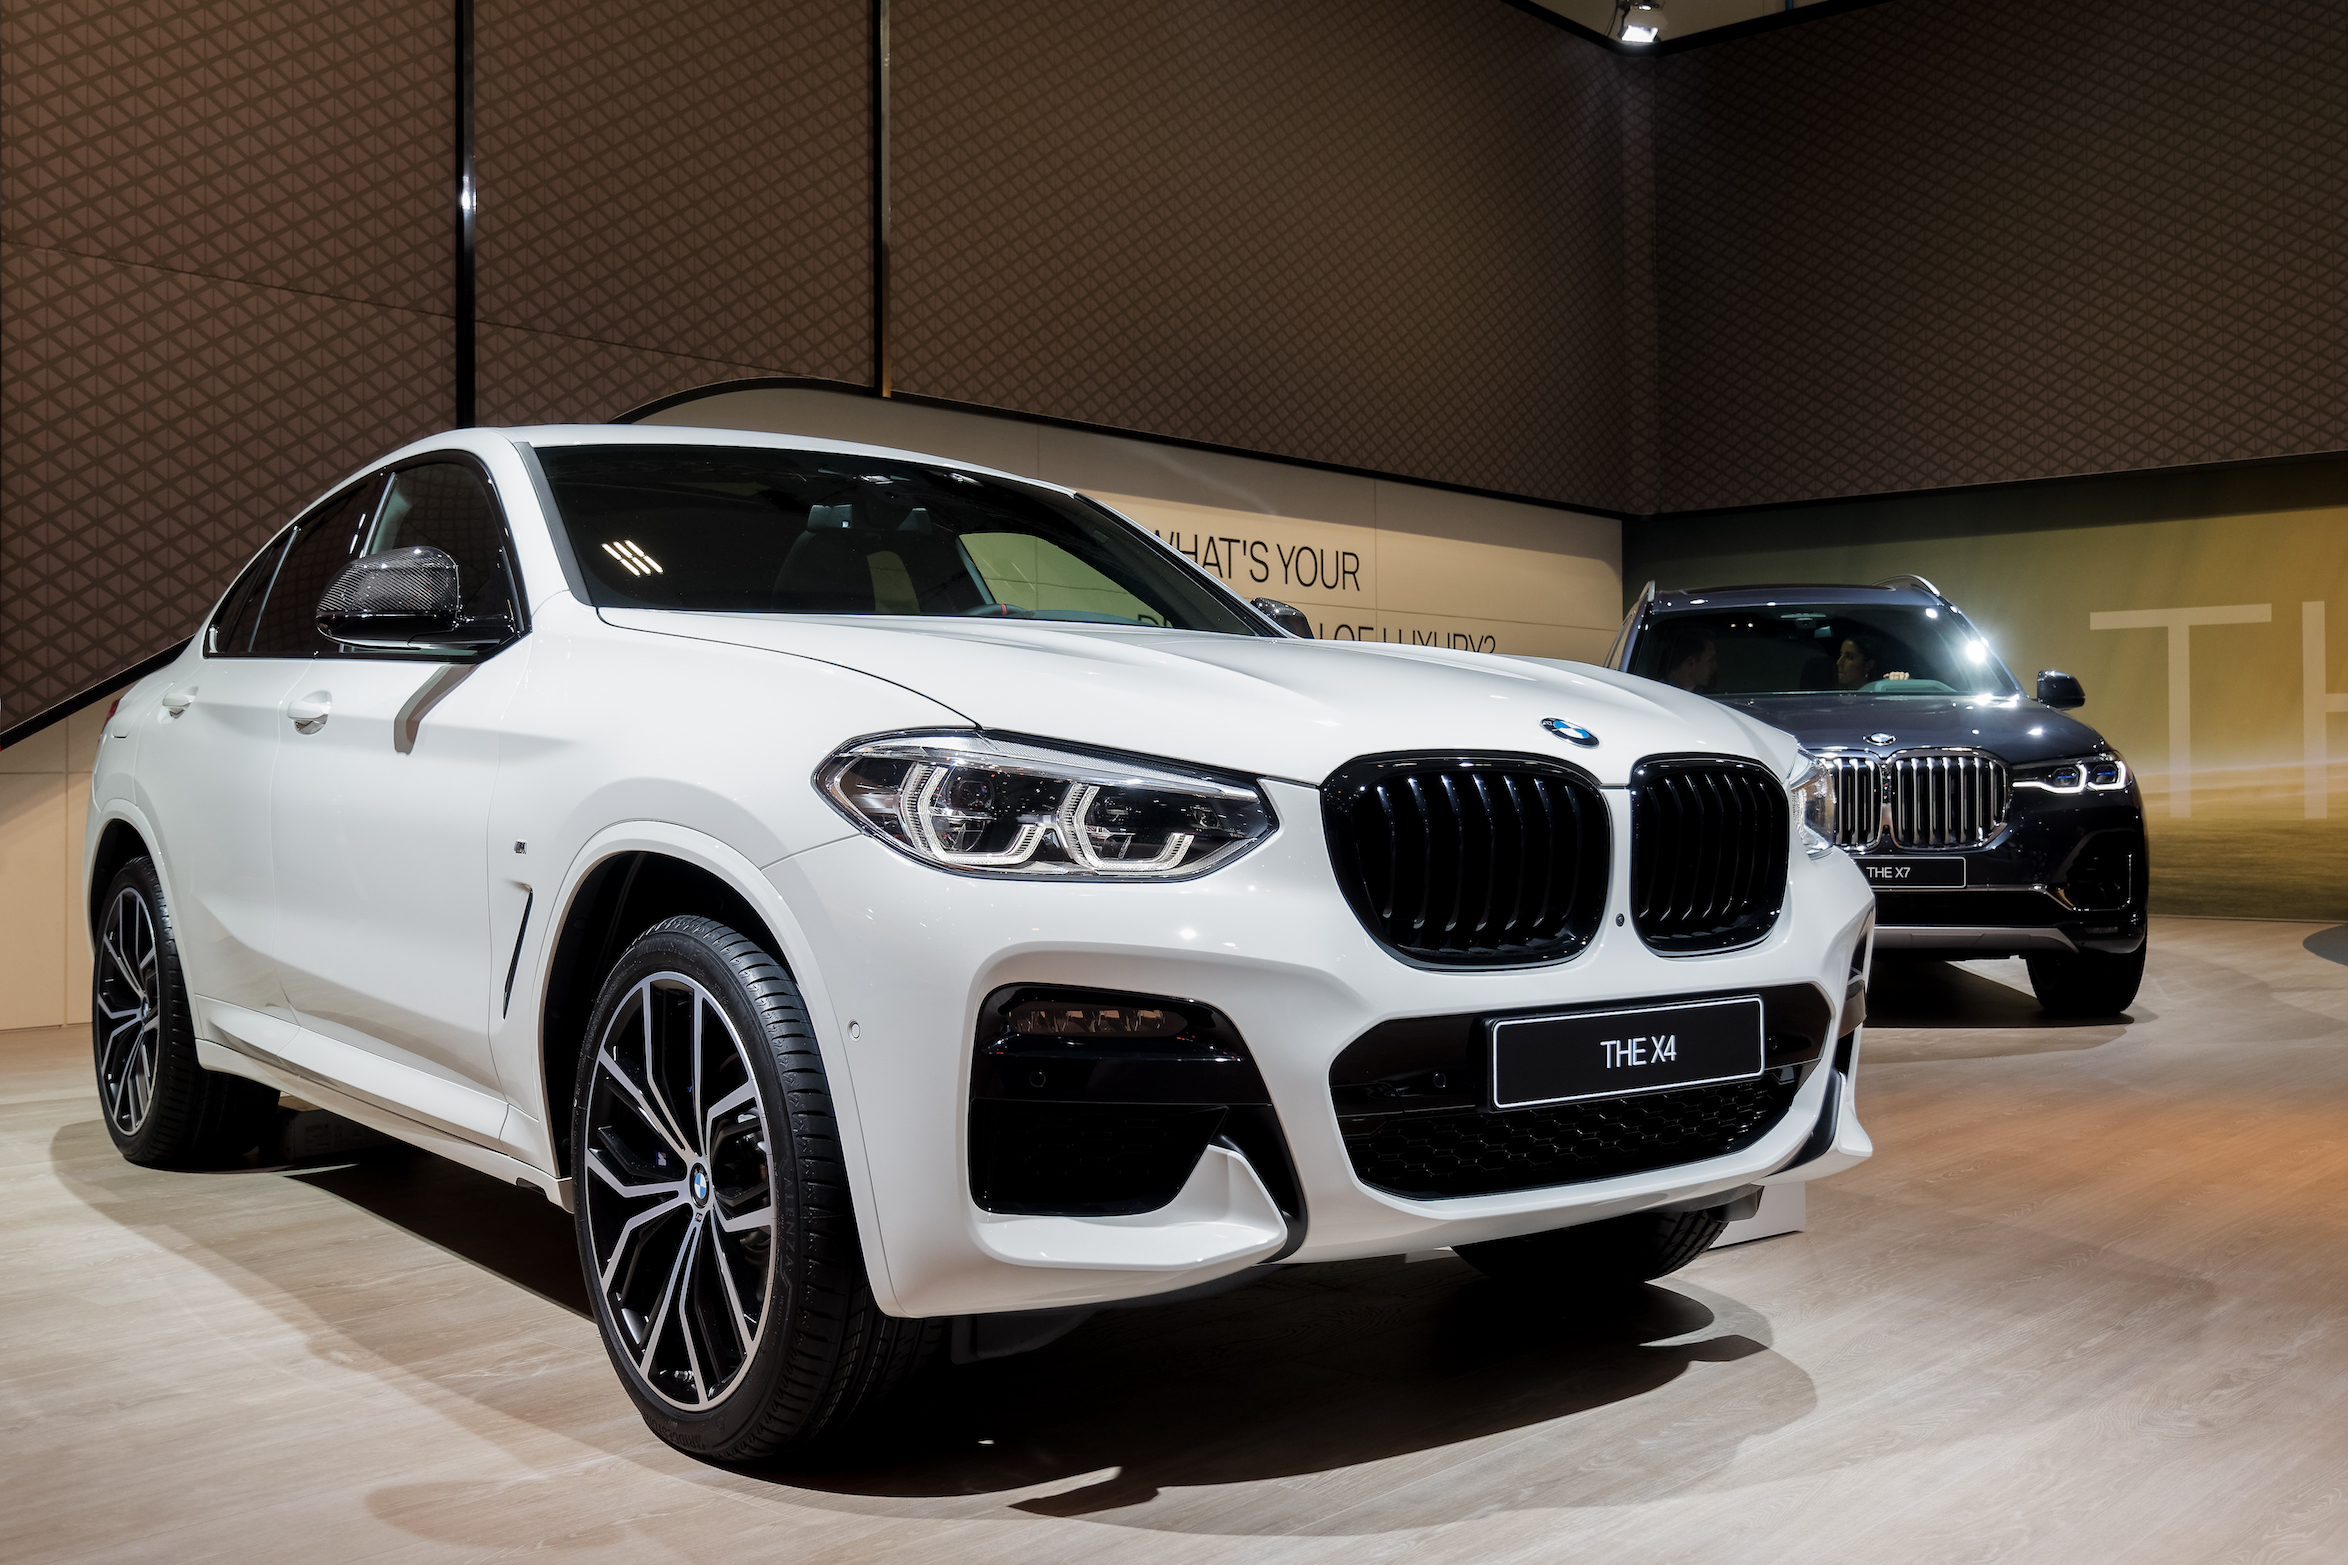 At Brussels Cars Show 2020 the brand BMW exhibits its model BMW X4